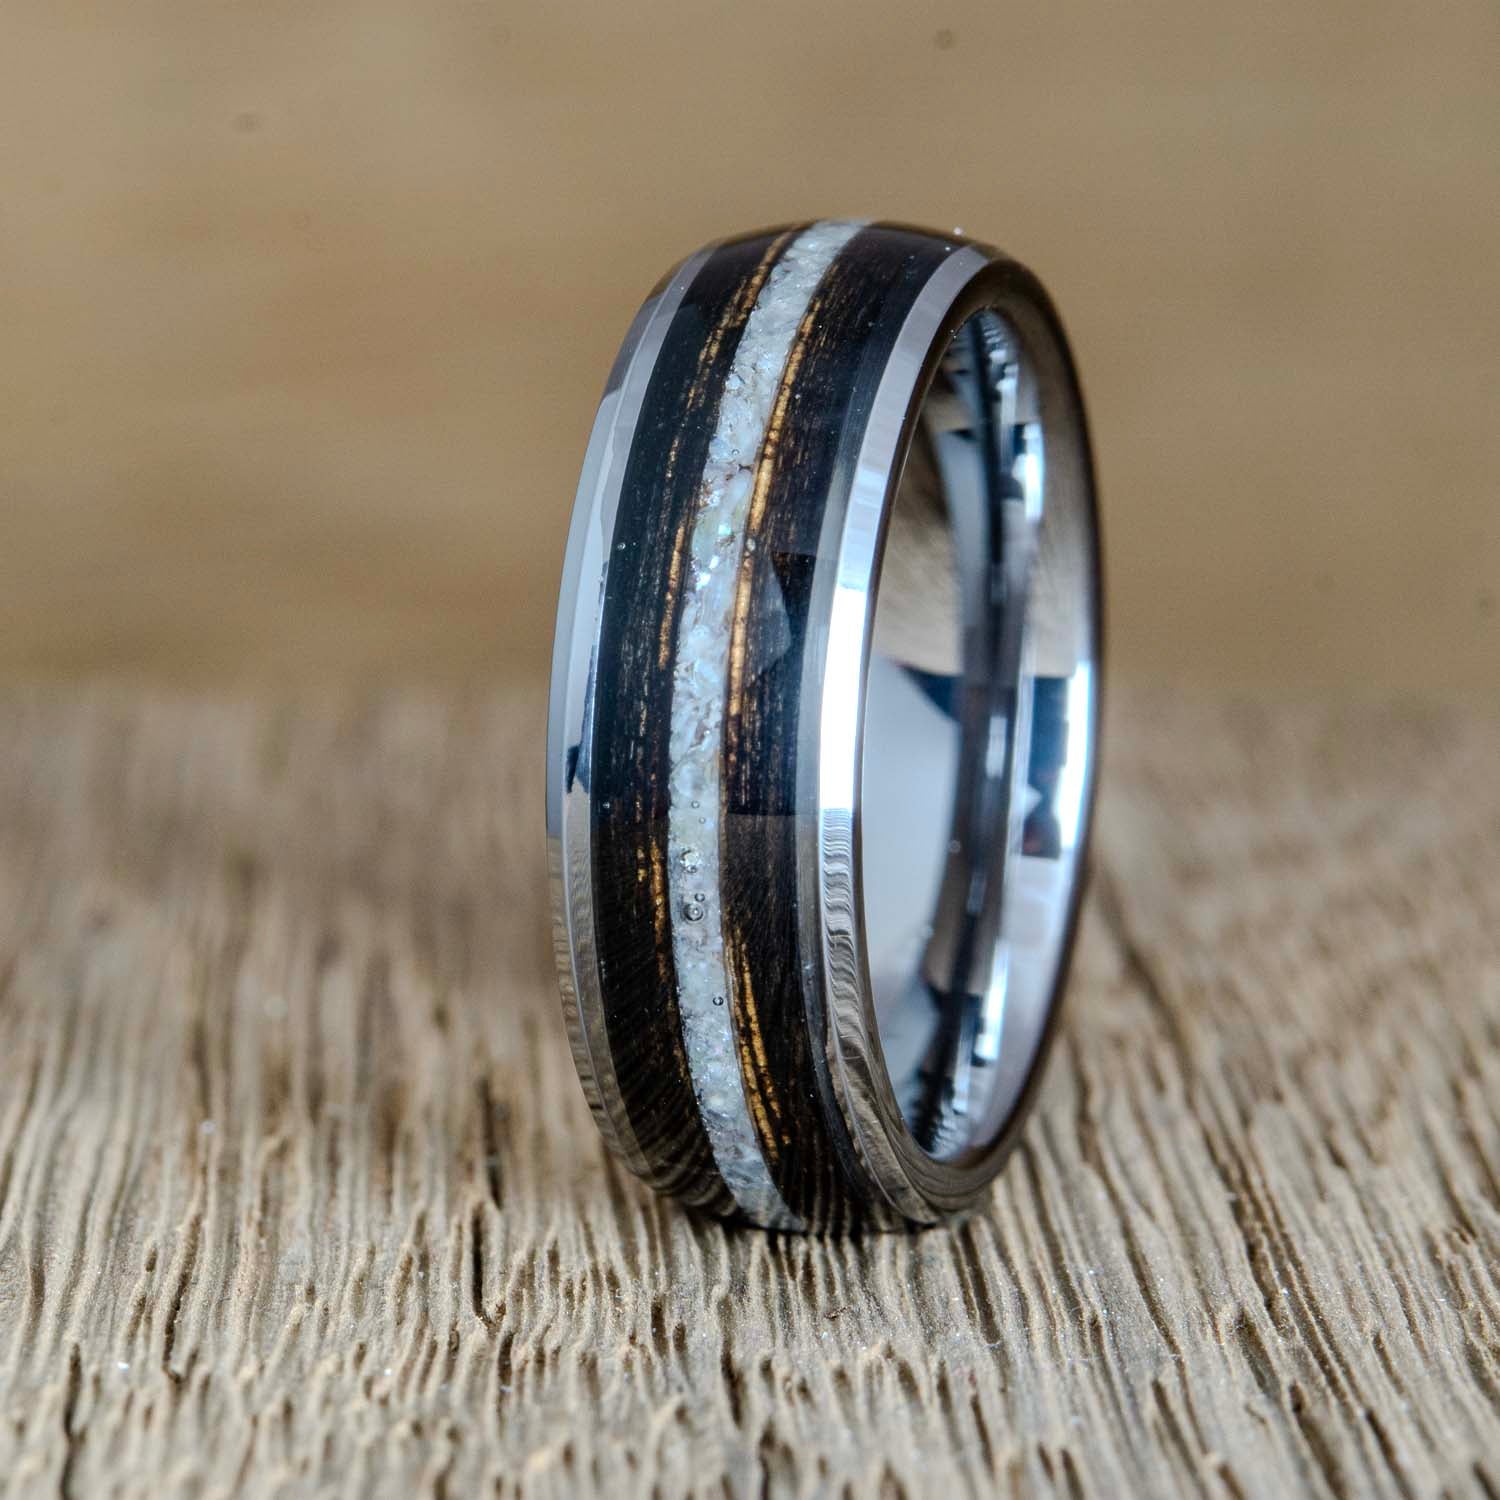 "Bourbon&Pearl" Charred Bourbon barrel wood and mother of pearl inlay tungsten ring